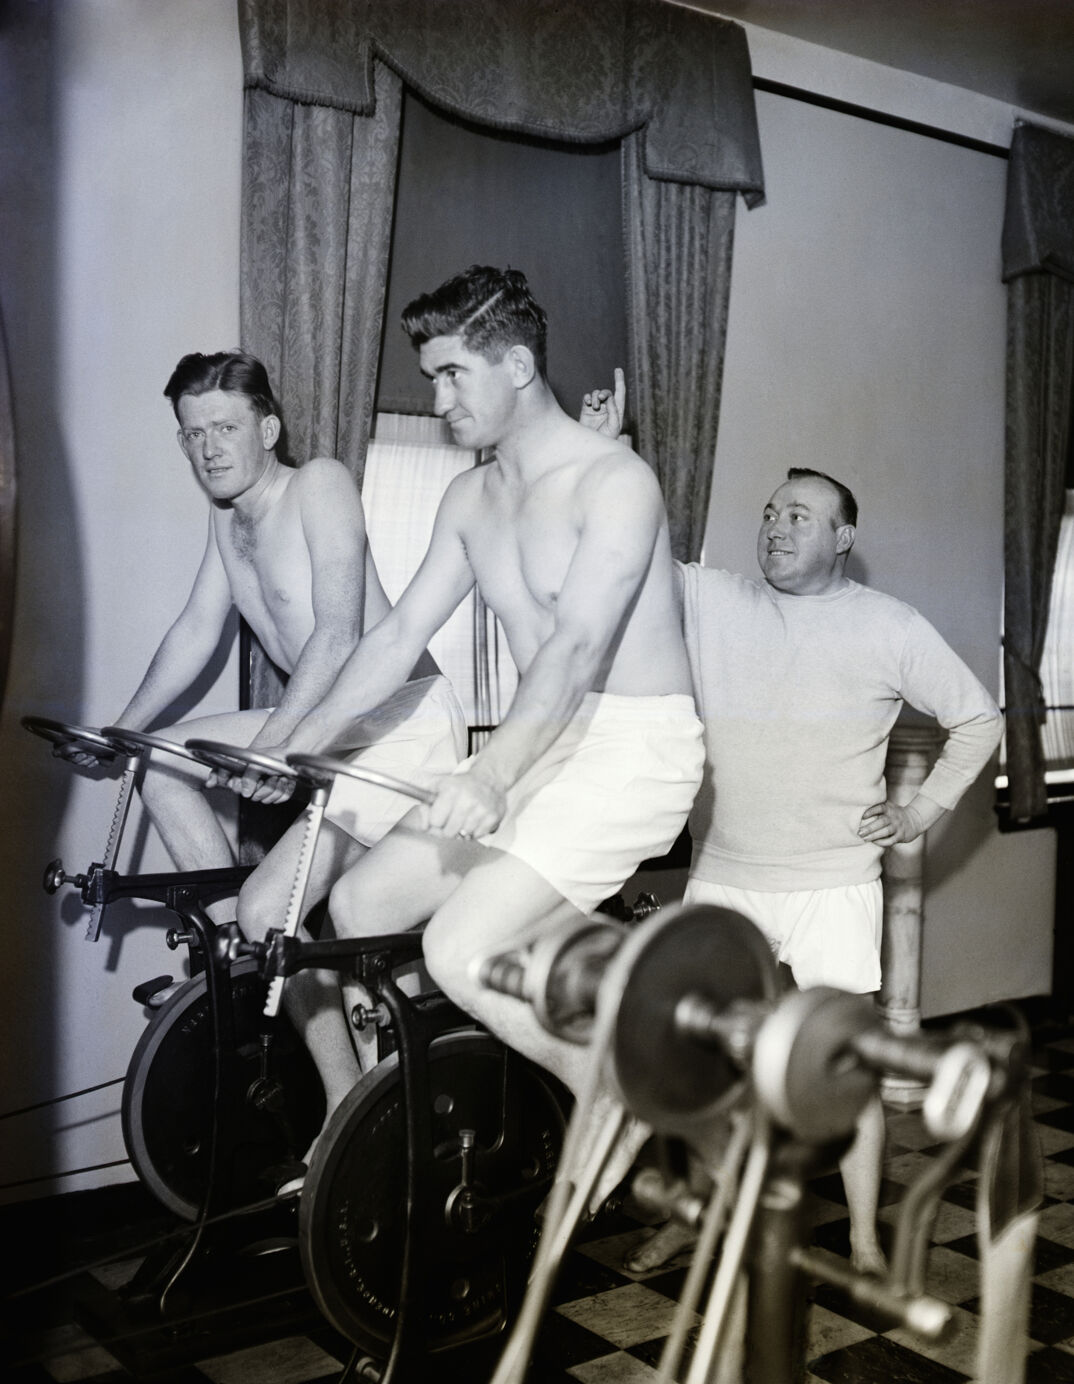 Black-and-white image. Two shirtless and fit young men are on workout bikes and sit up straight as they pedal. They are in a room with two curtained windows and other workout machines. Behind them, a shorter and stout man in a white long sleeve shirt and shorts points and leads them in their workout.